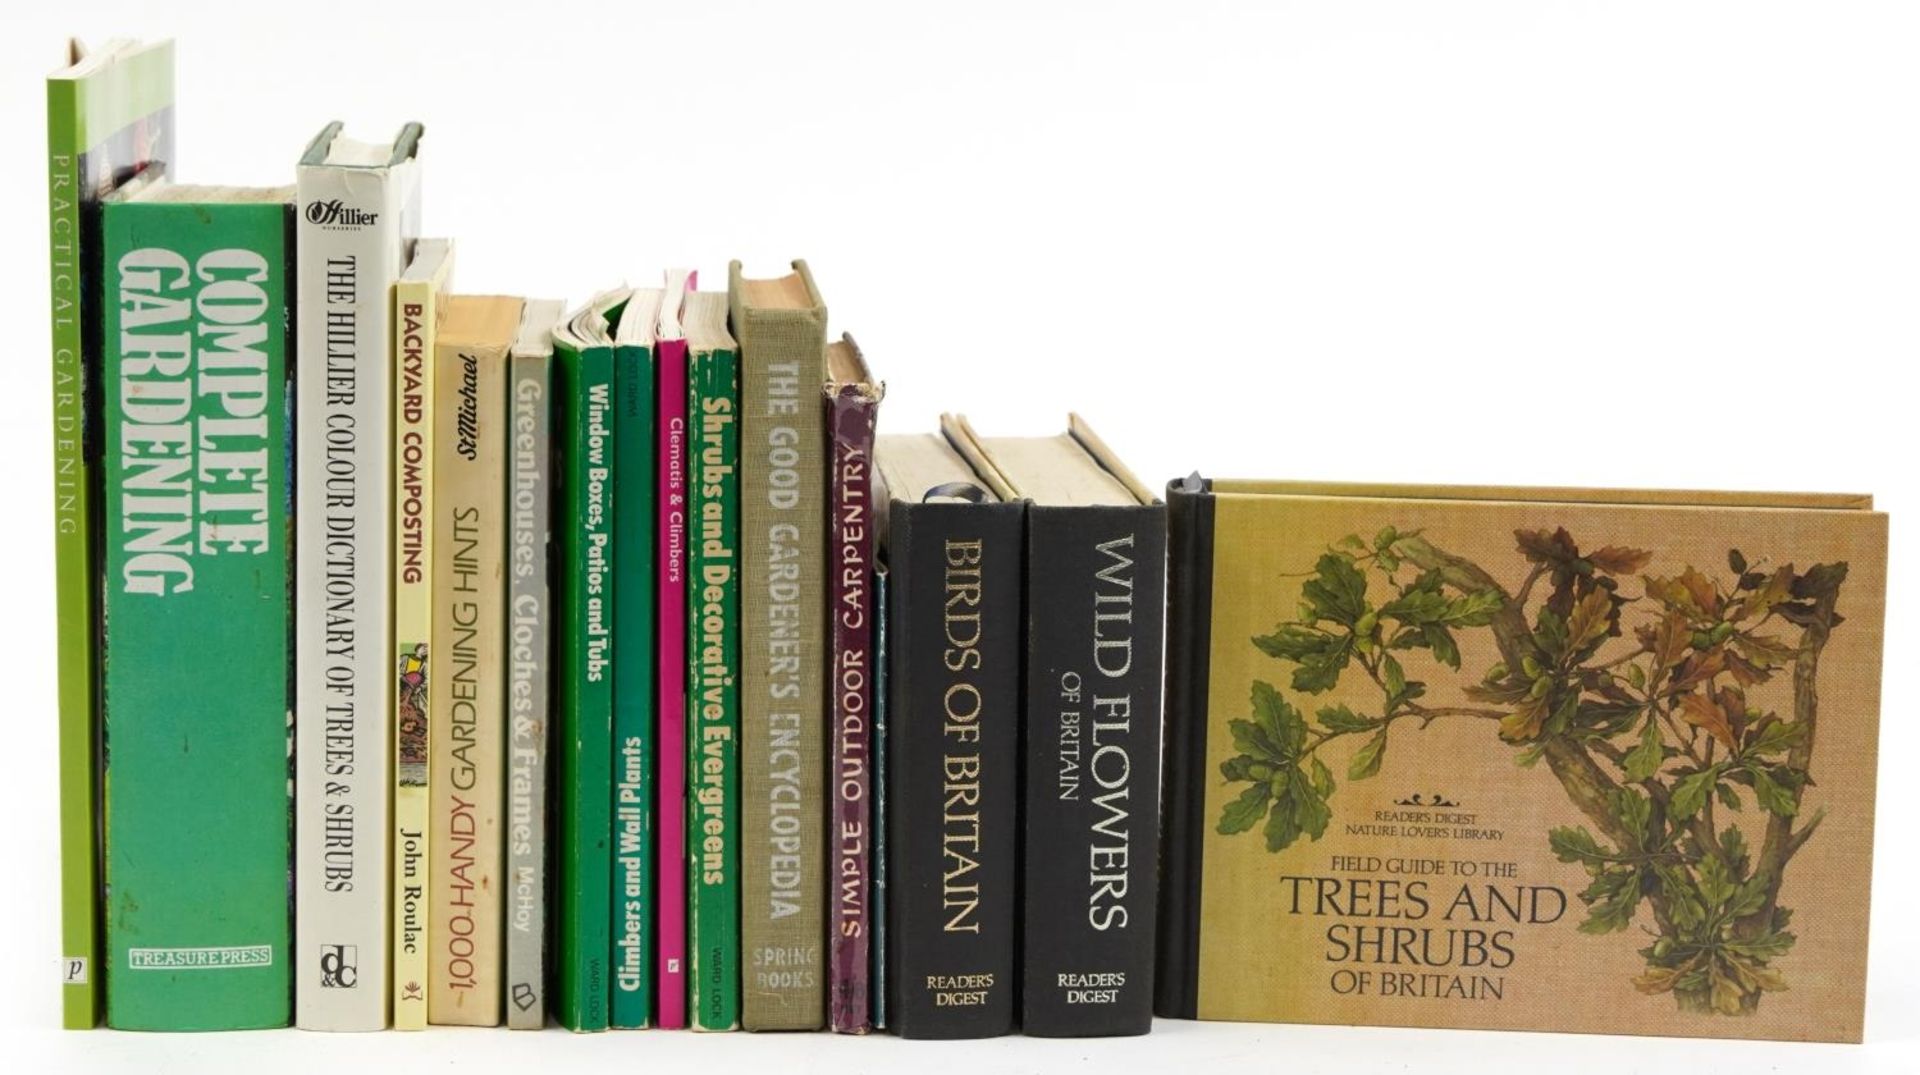 Books on gardening including The Complete Gardening, The Hillier Colour Dictionary of Trees and